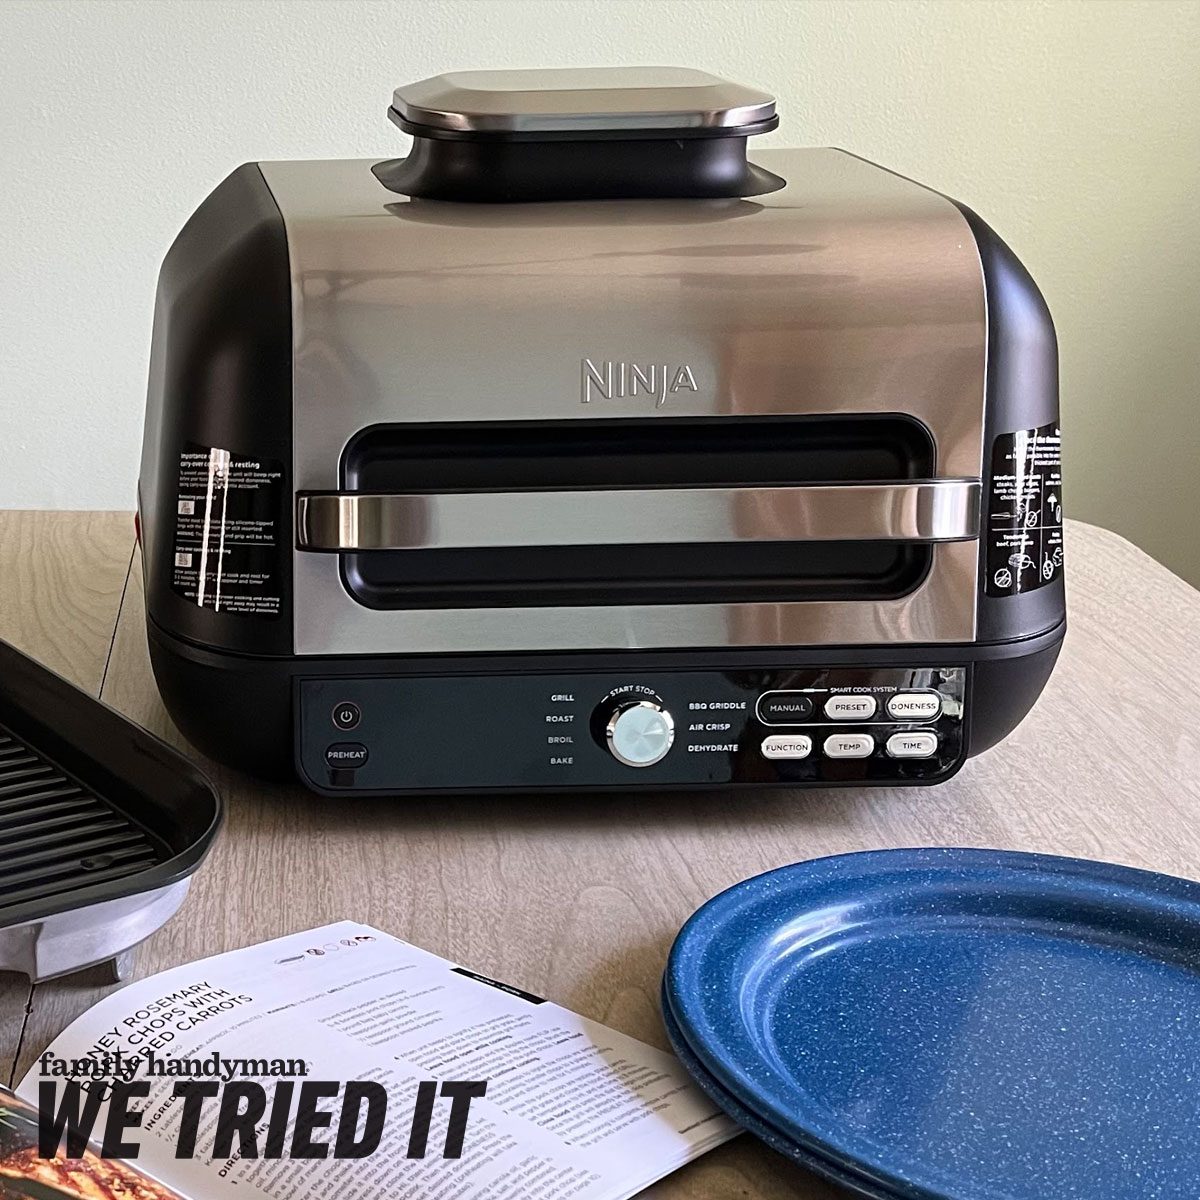 The Ninja Foodi XL Pro indoor grill is perfect for apartment living